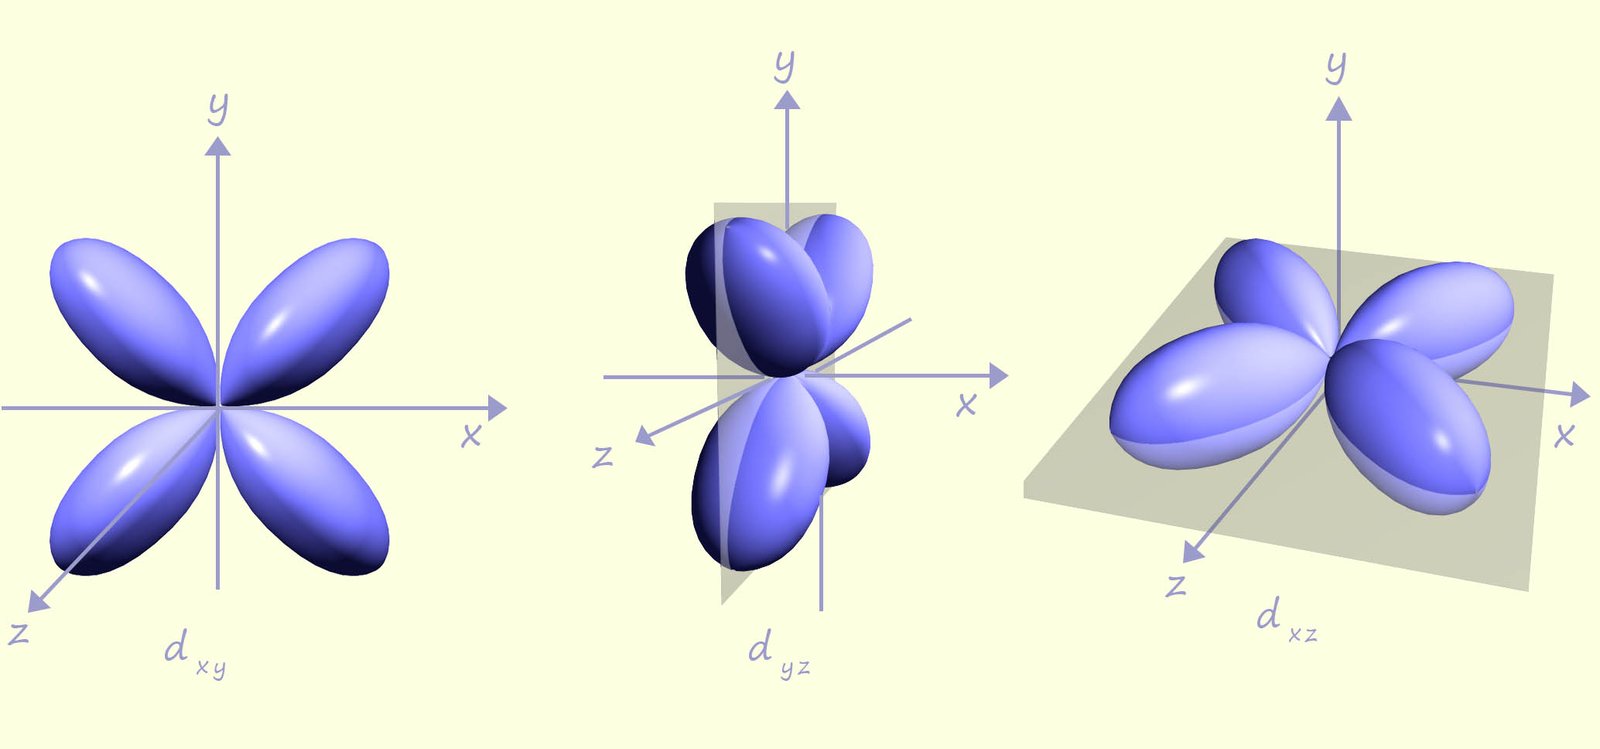 image to show the shapes of the 5 d orbitals found inside an atom